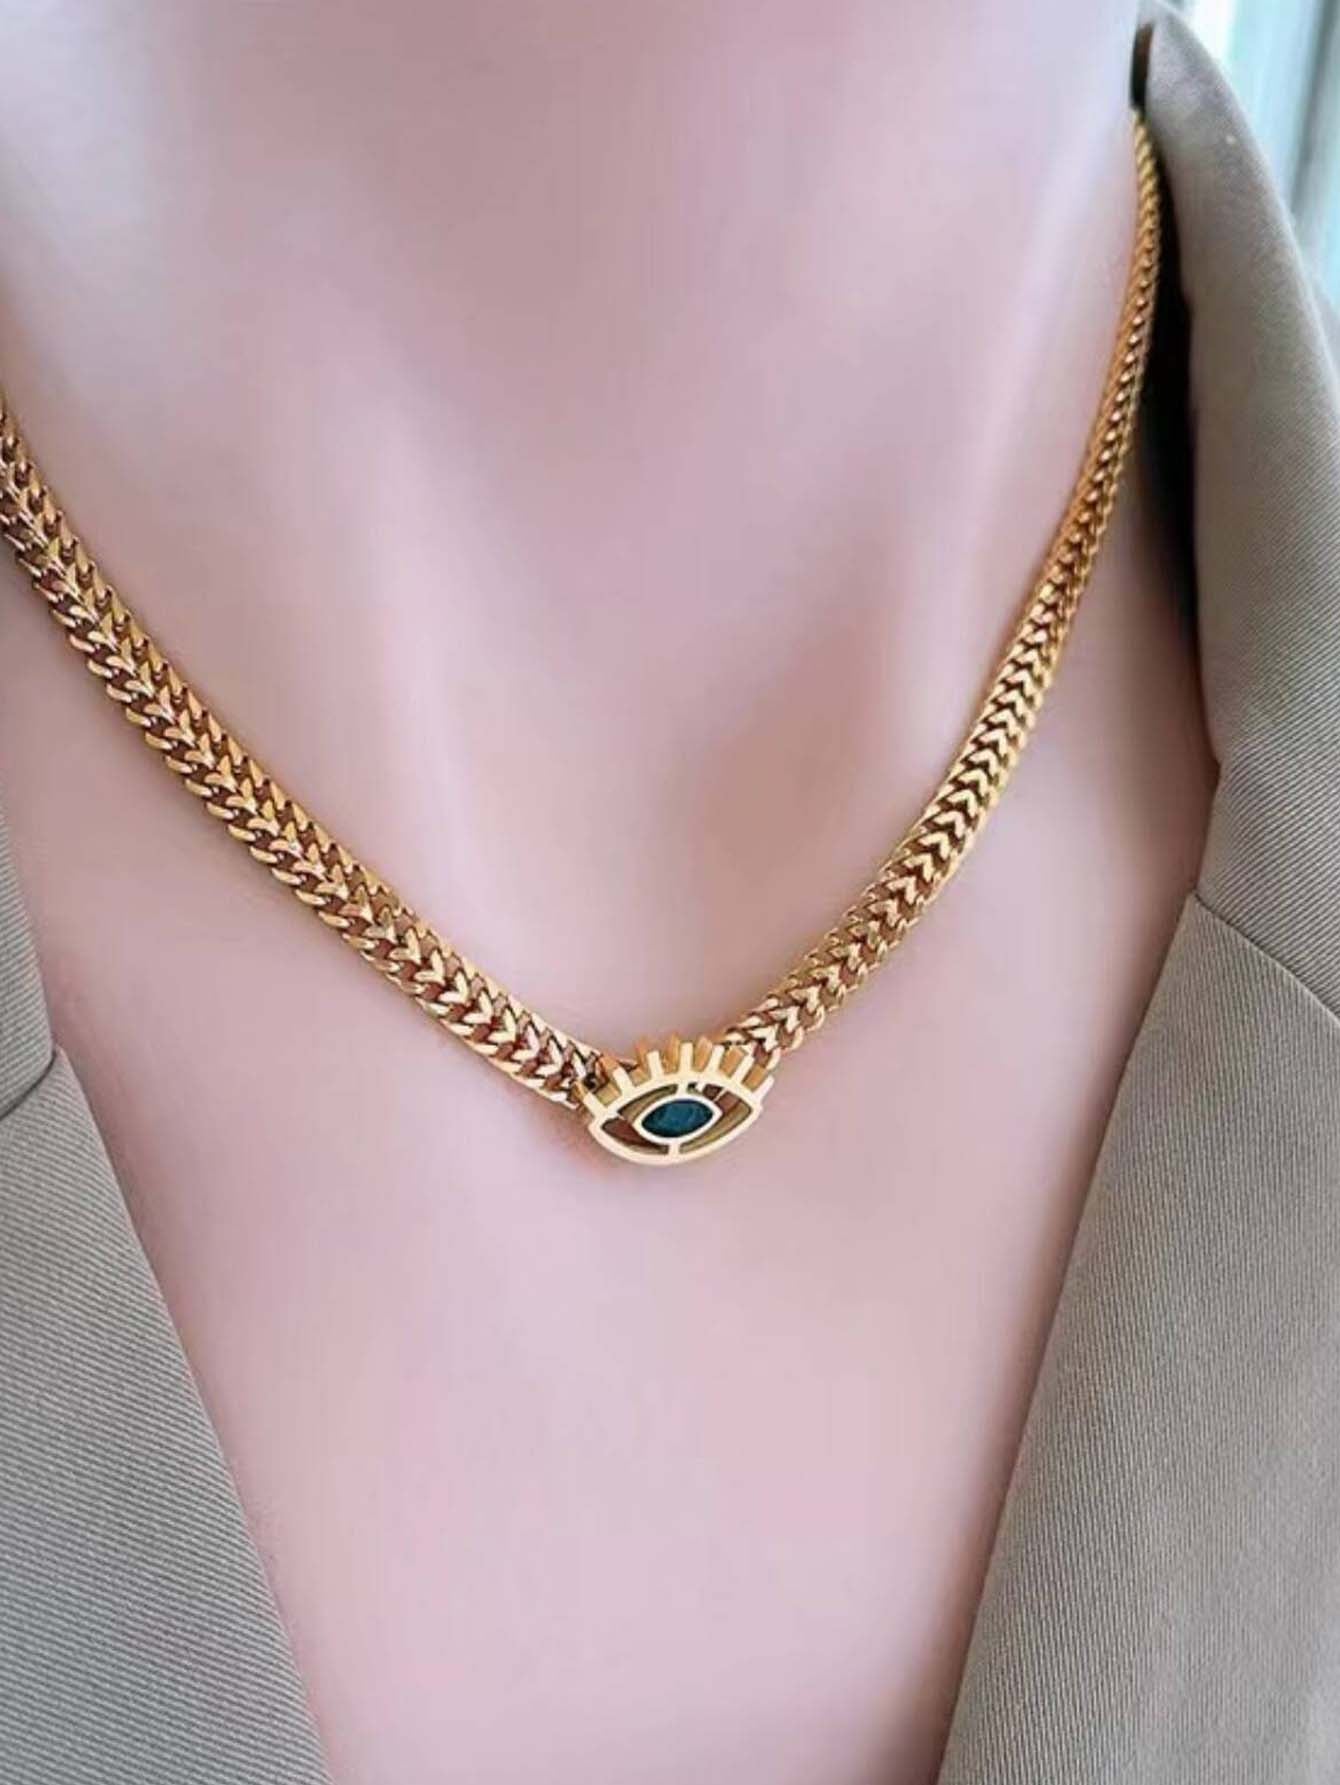 1set Eye-shaped Chain Necklace And Bracelet Jewelry Set -  Gold